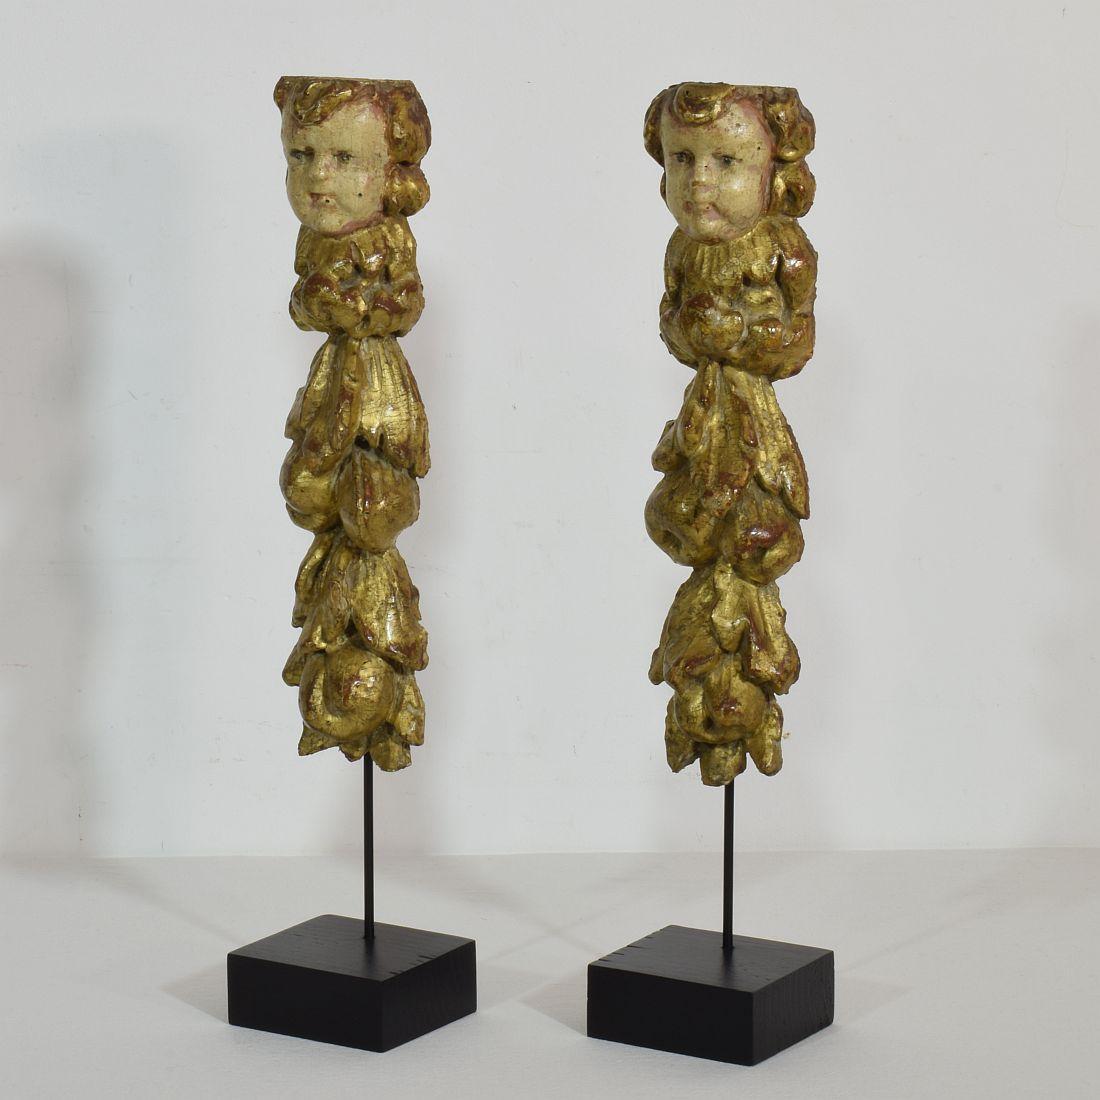 Unique carved wooden ornaments with angel heads, Italy, circa 1750. Weathered.
Measurement includes the wooden base.










  